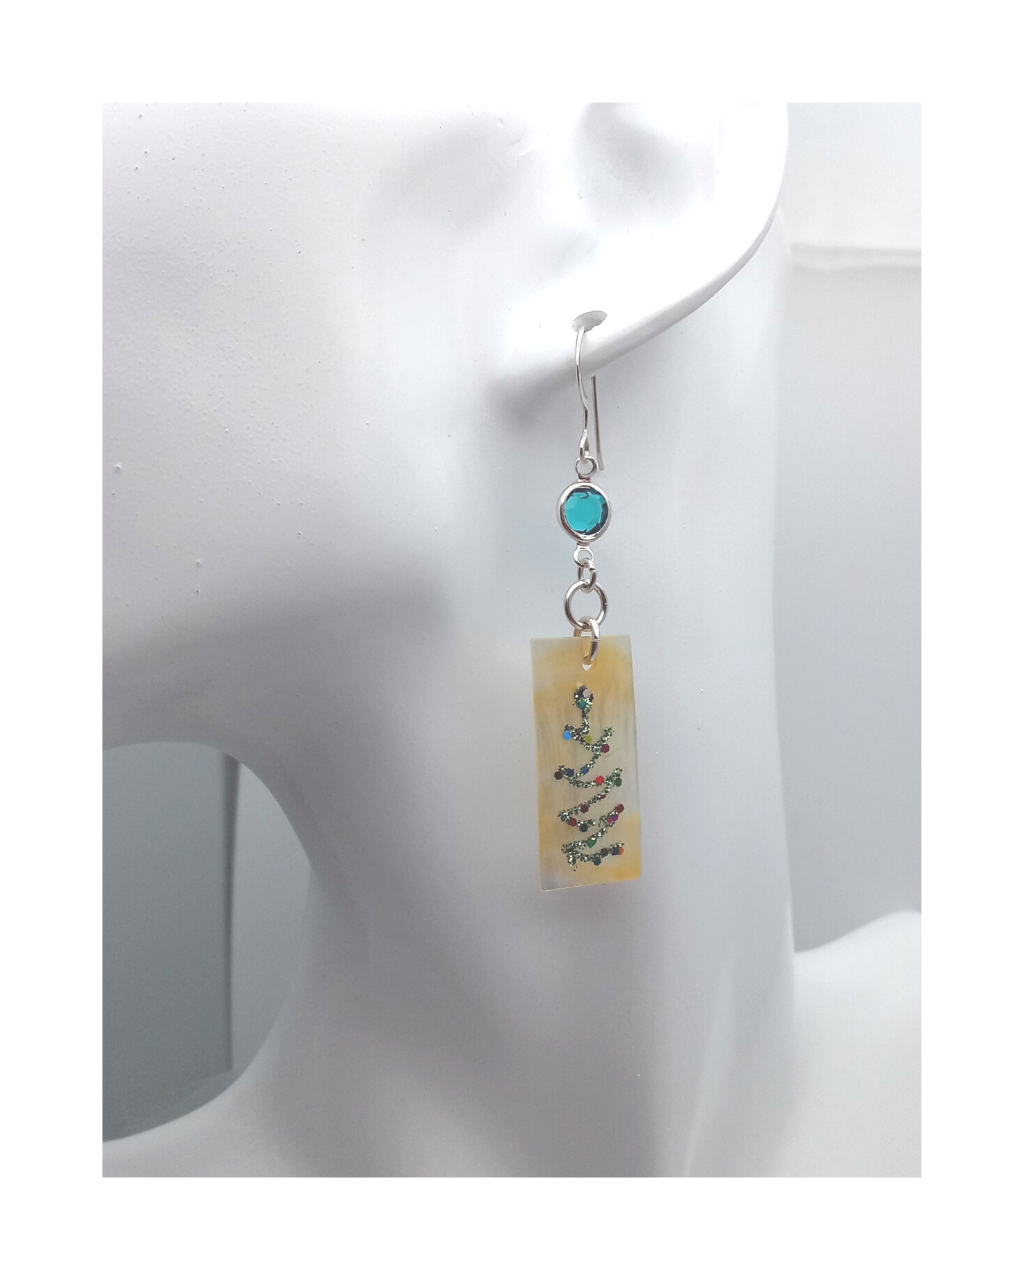 Exclusive Sterling Gold Mother-of-pearl Shell with Sparkle Christmas Tree Design and Swarovski Crystal Earrings 2 9/16"L X 9/16"W. ONE ONLY